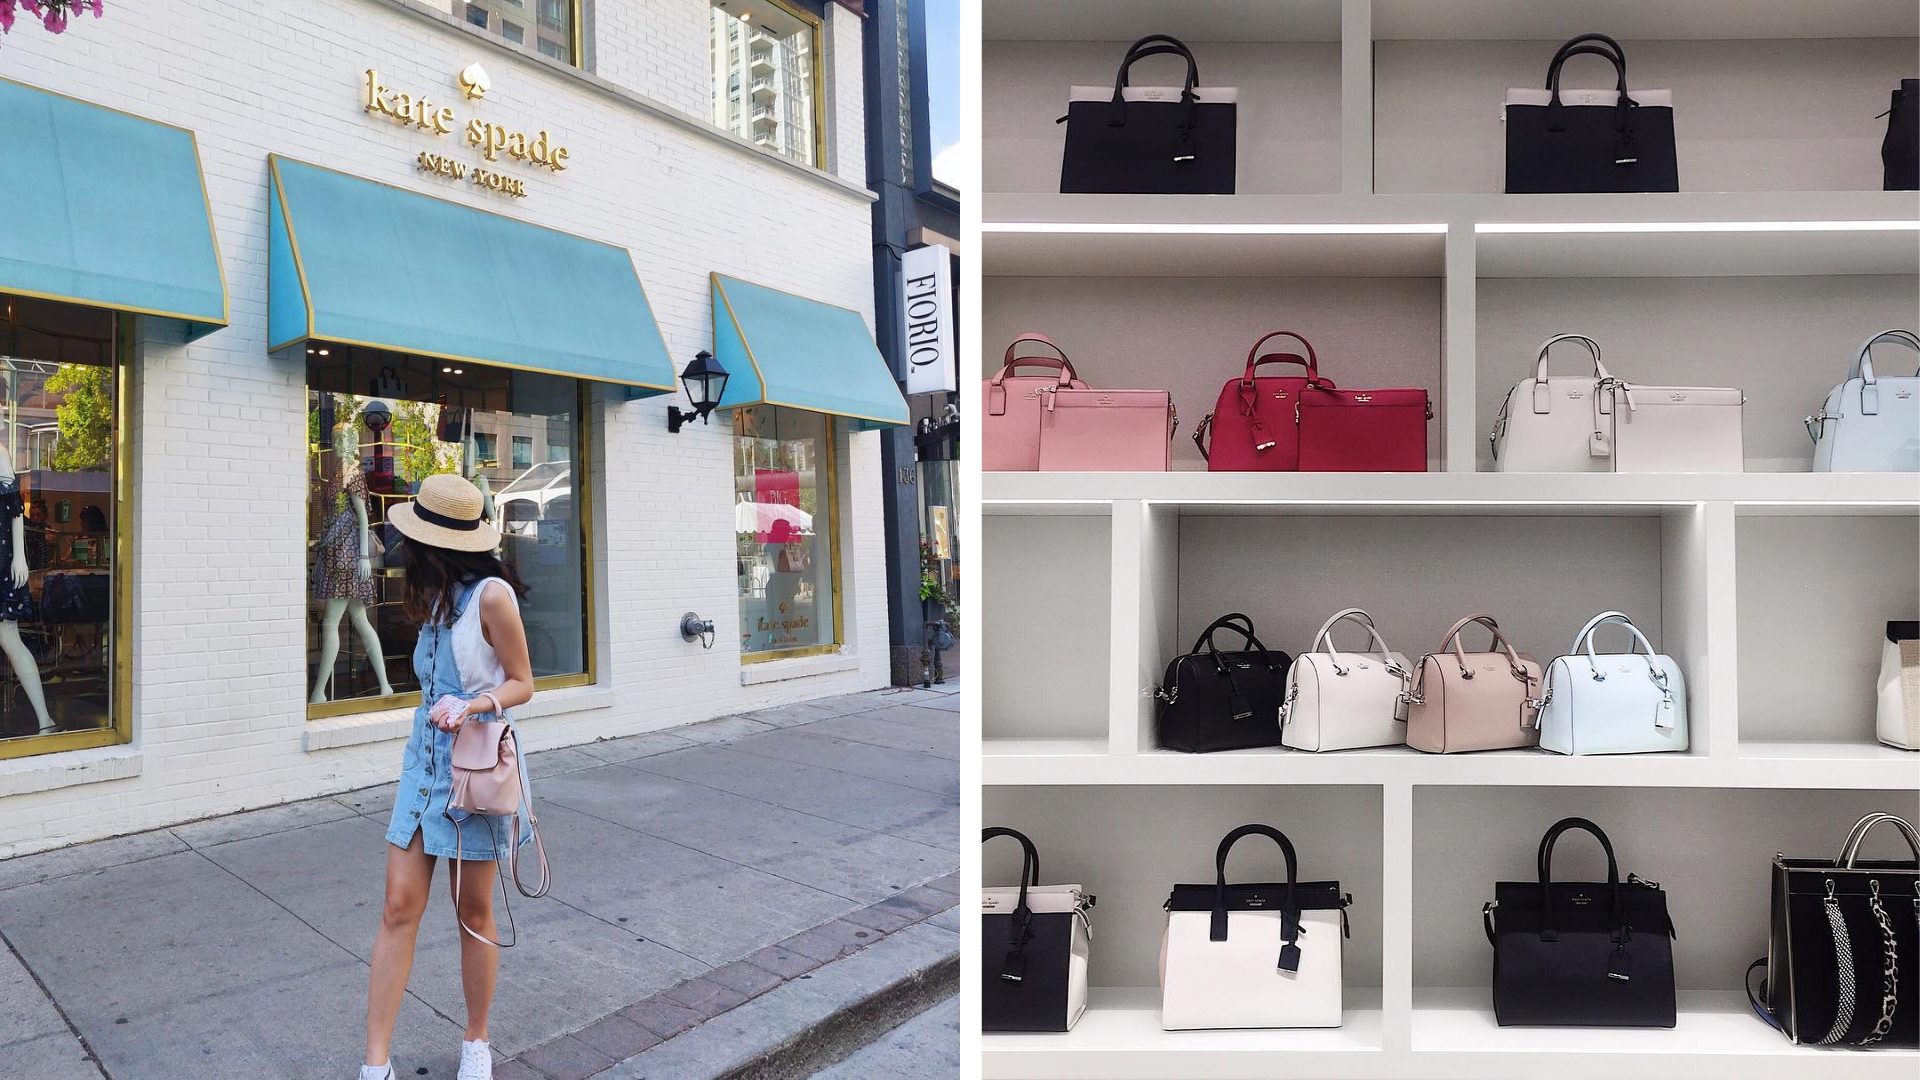 Kate Spade Shutters Doors Of Its Two-Level Flagship After 8 Years